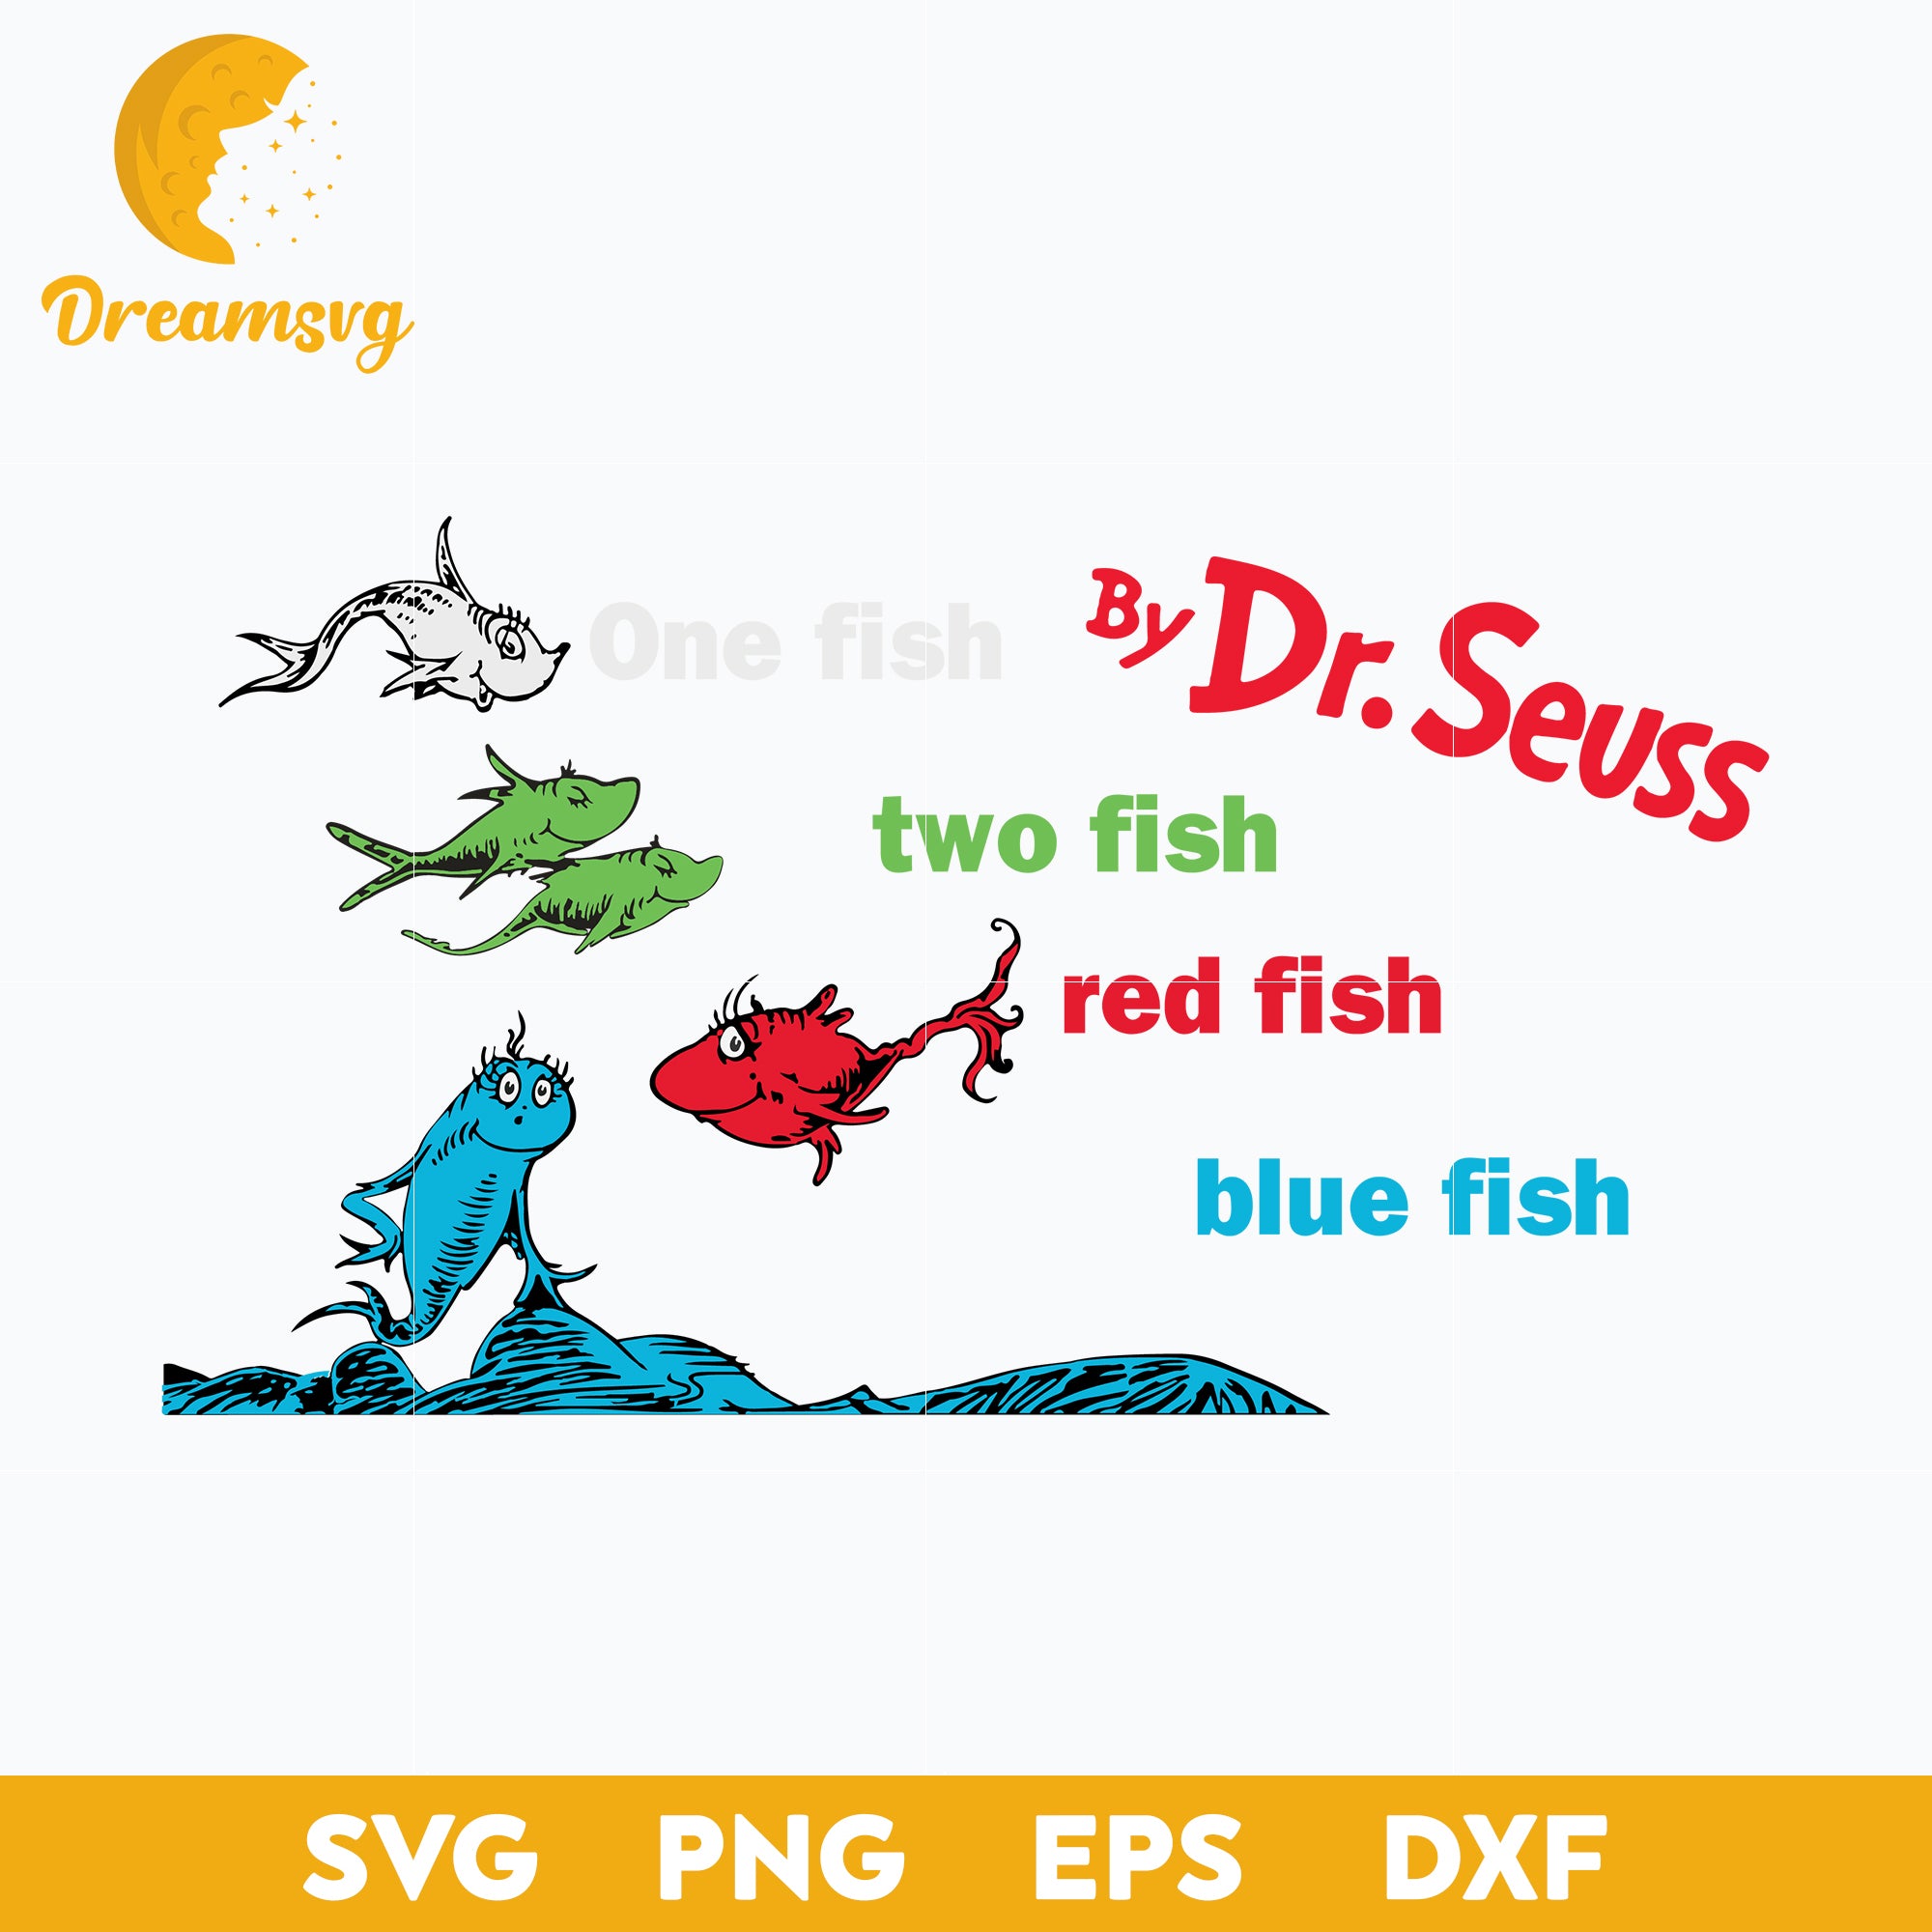 One fish two fish red fish blue fish svg, dr seuss svg, eps, png, dxf